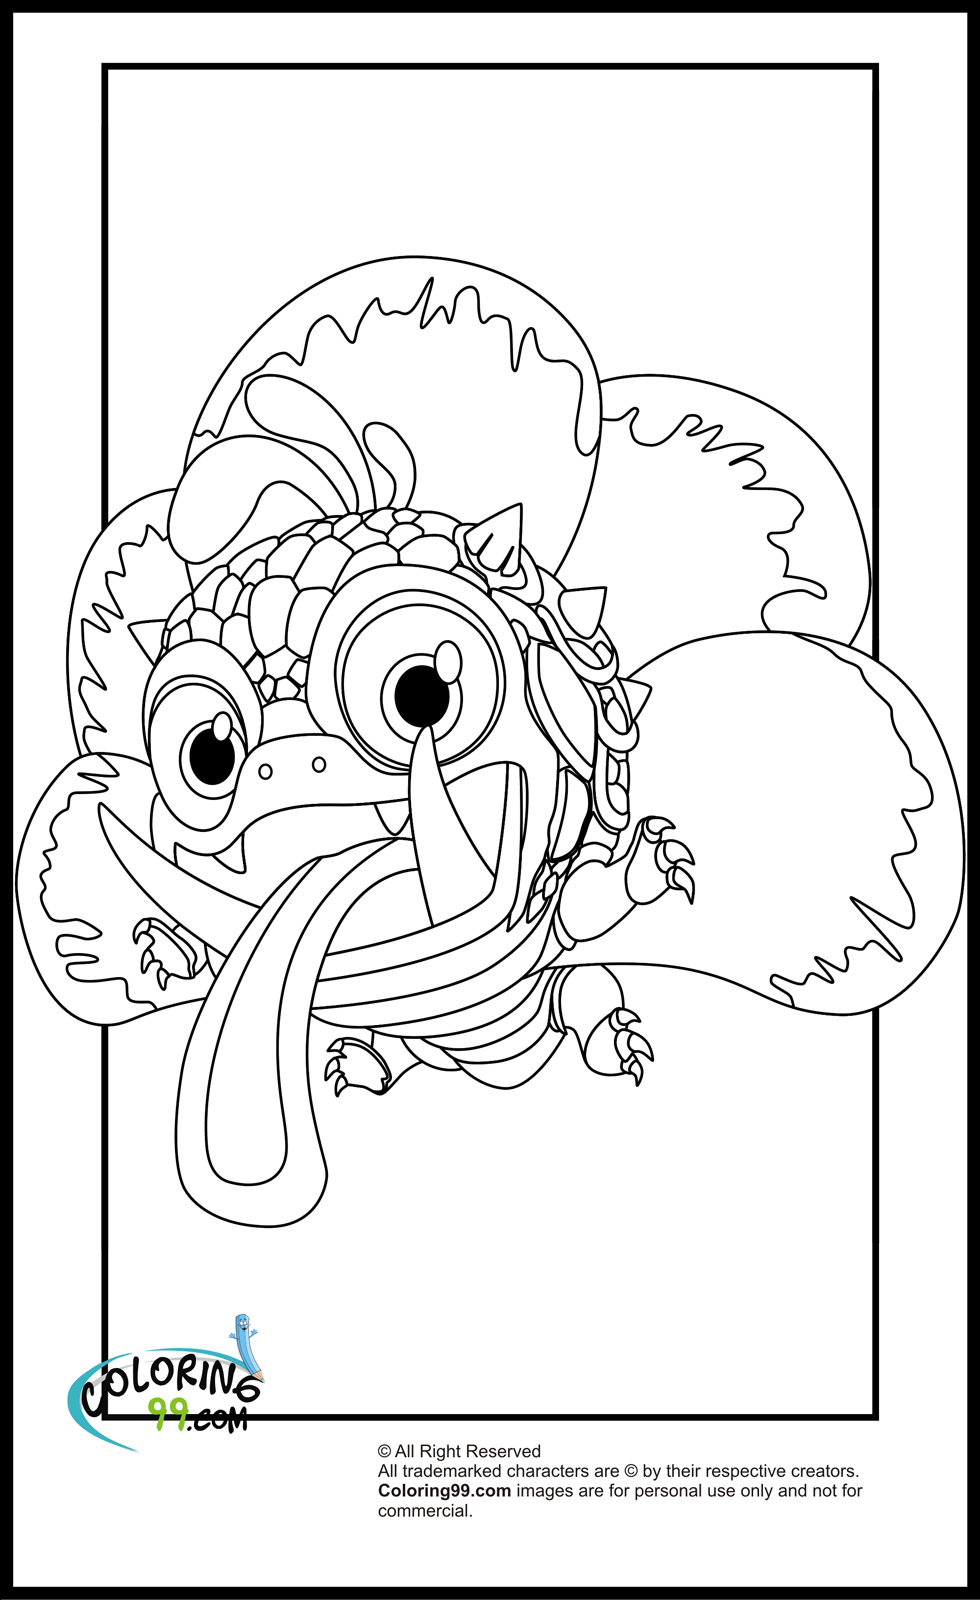 Download Skylanders Magic Element Coloring Pages | Minister Coloring